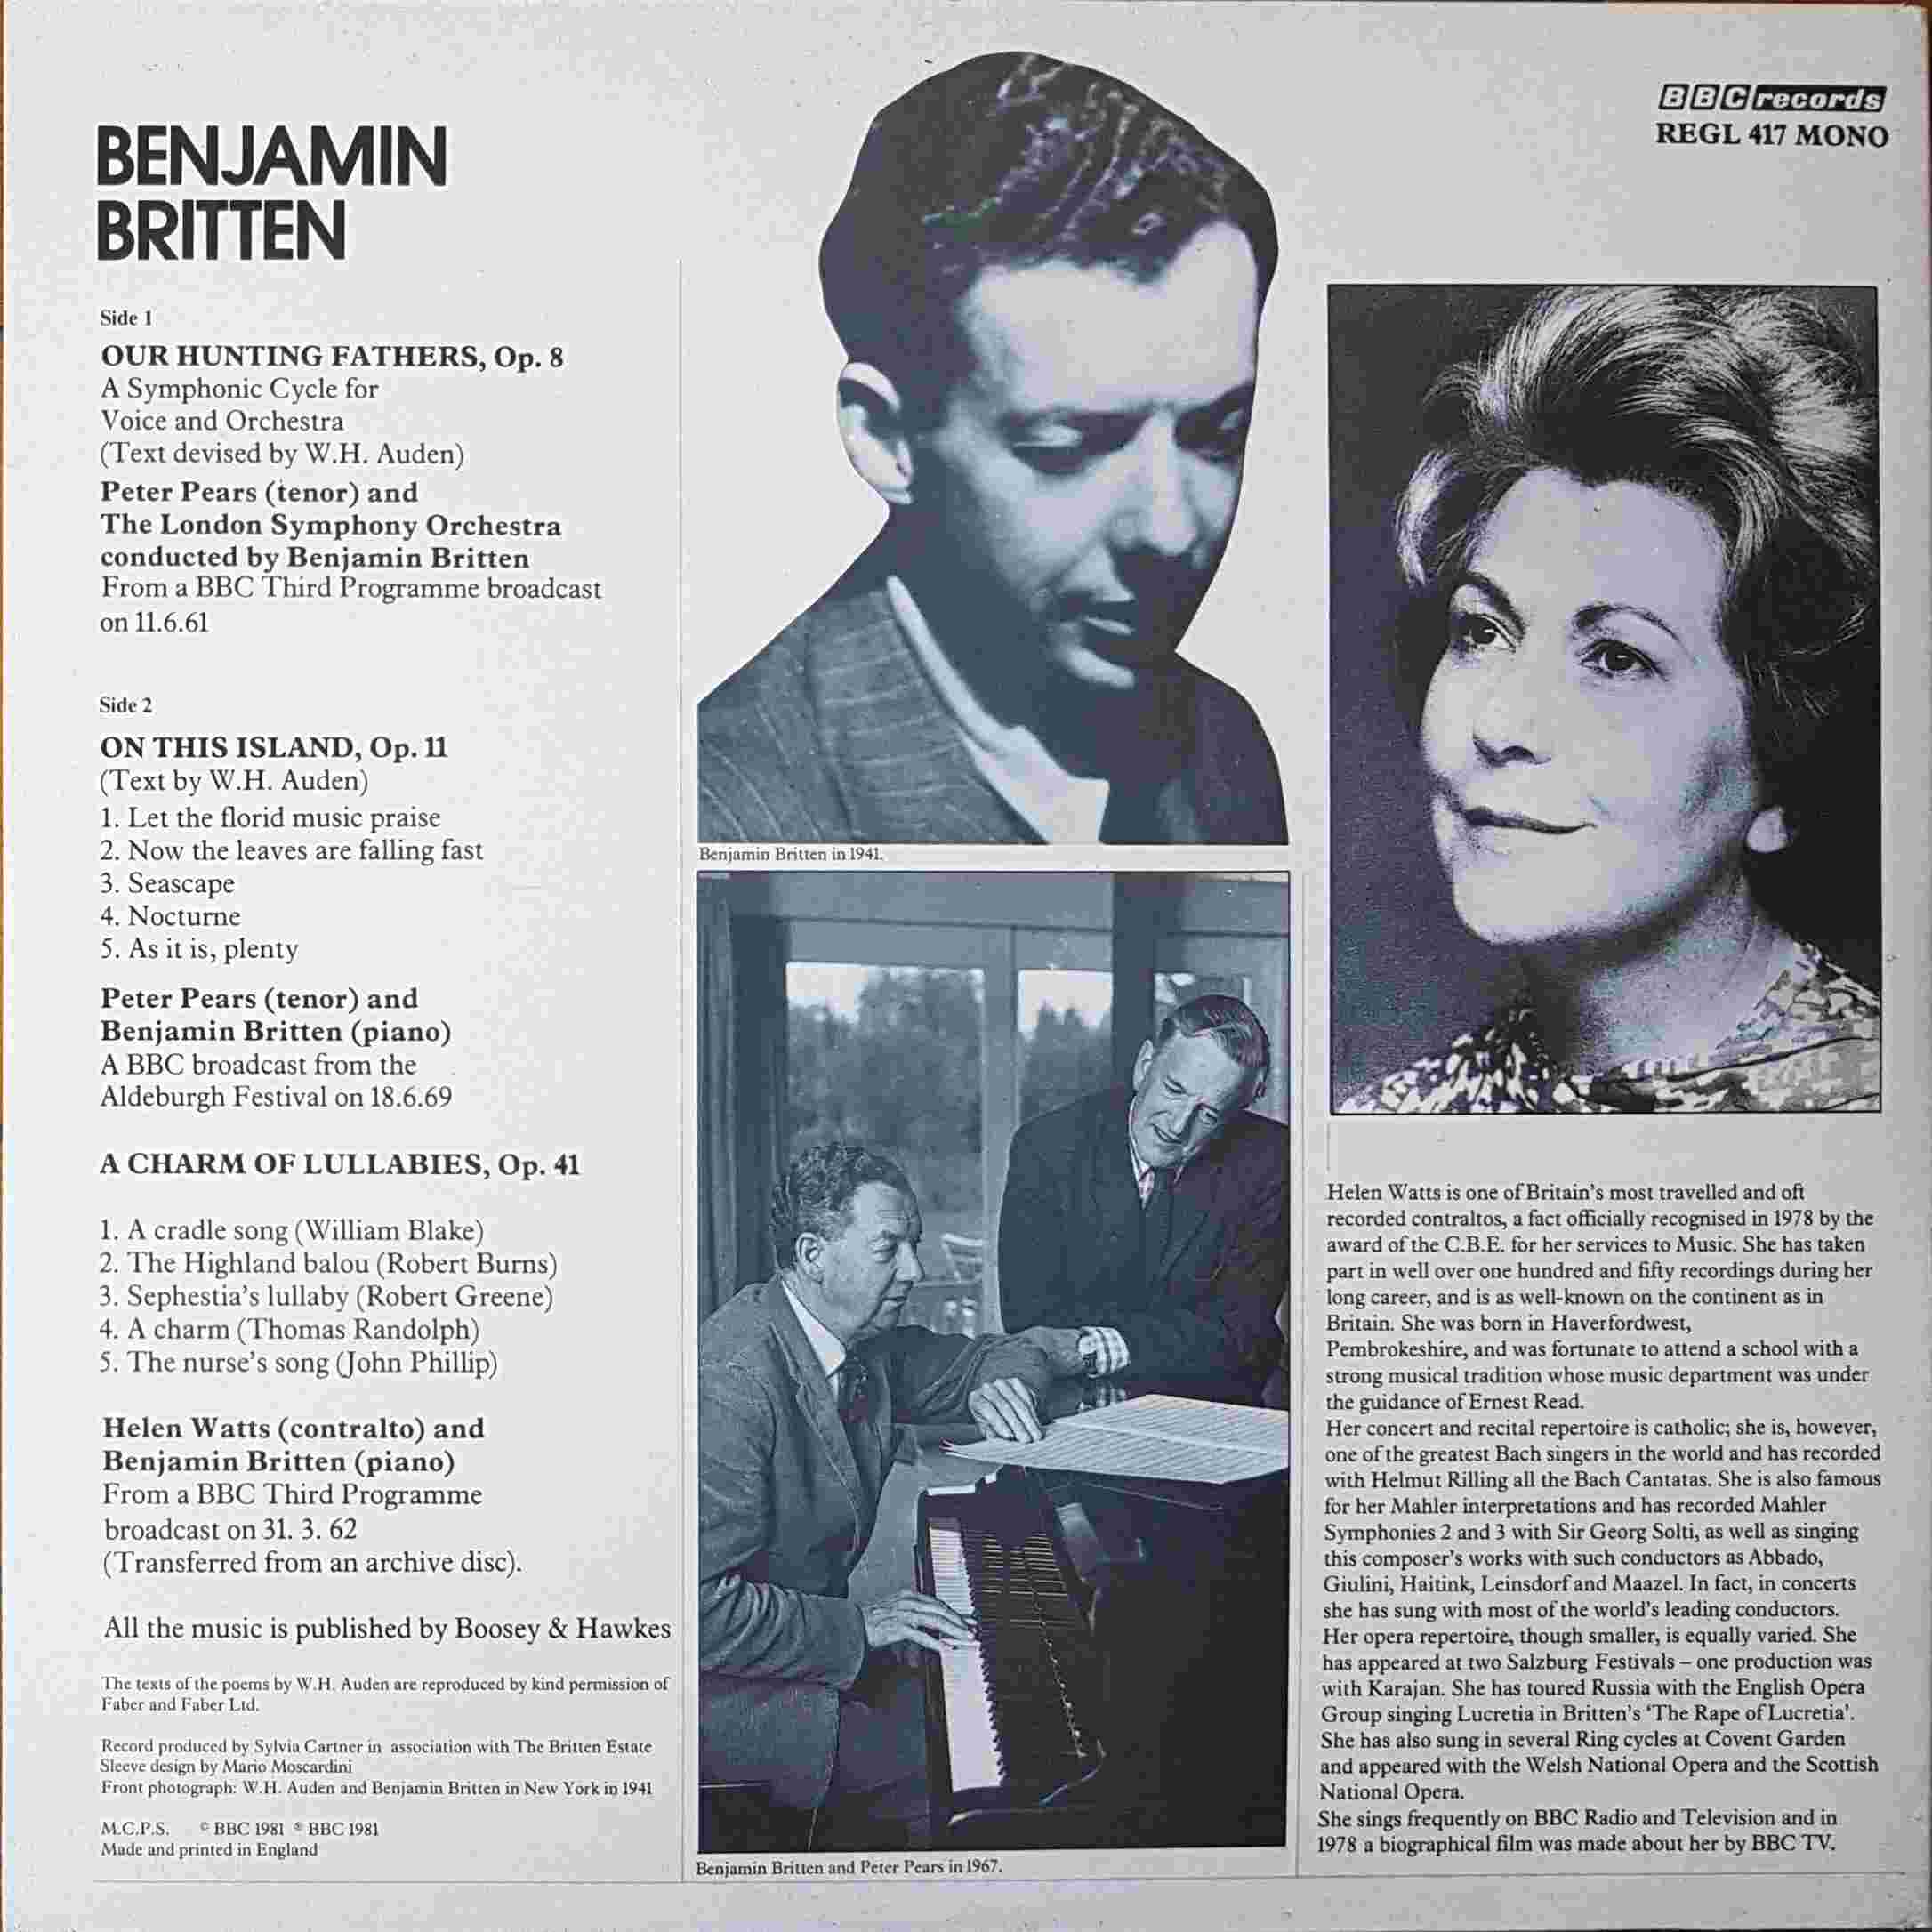 Picture of REGL 417 Benjamin Britten - Our hunting fathers by artist Benjamin Britten from the BBC records and Tapes library